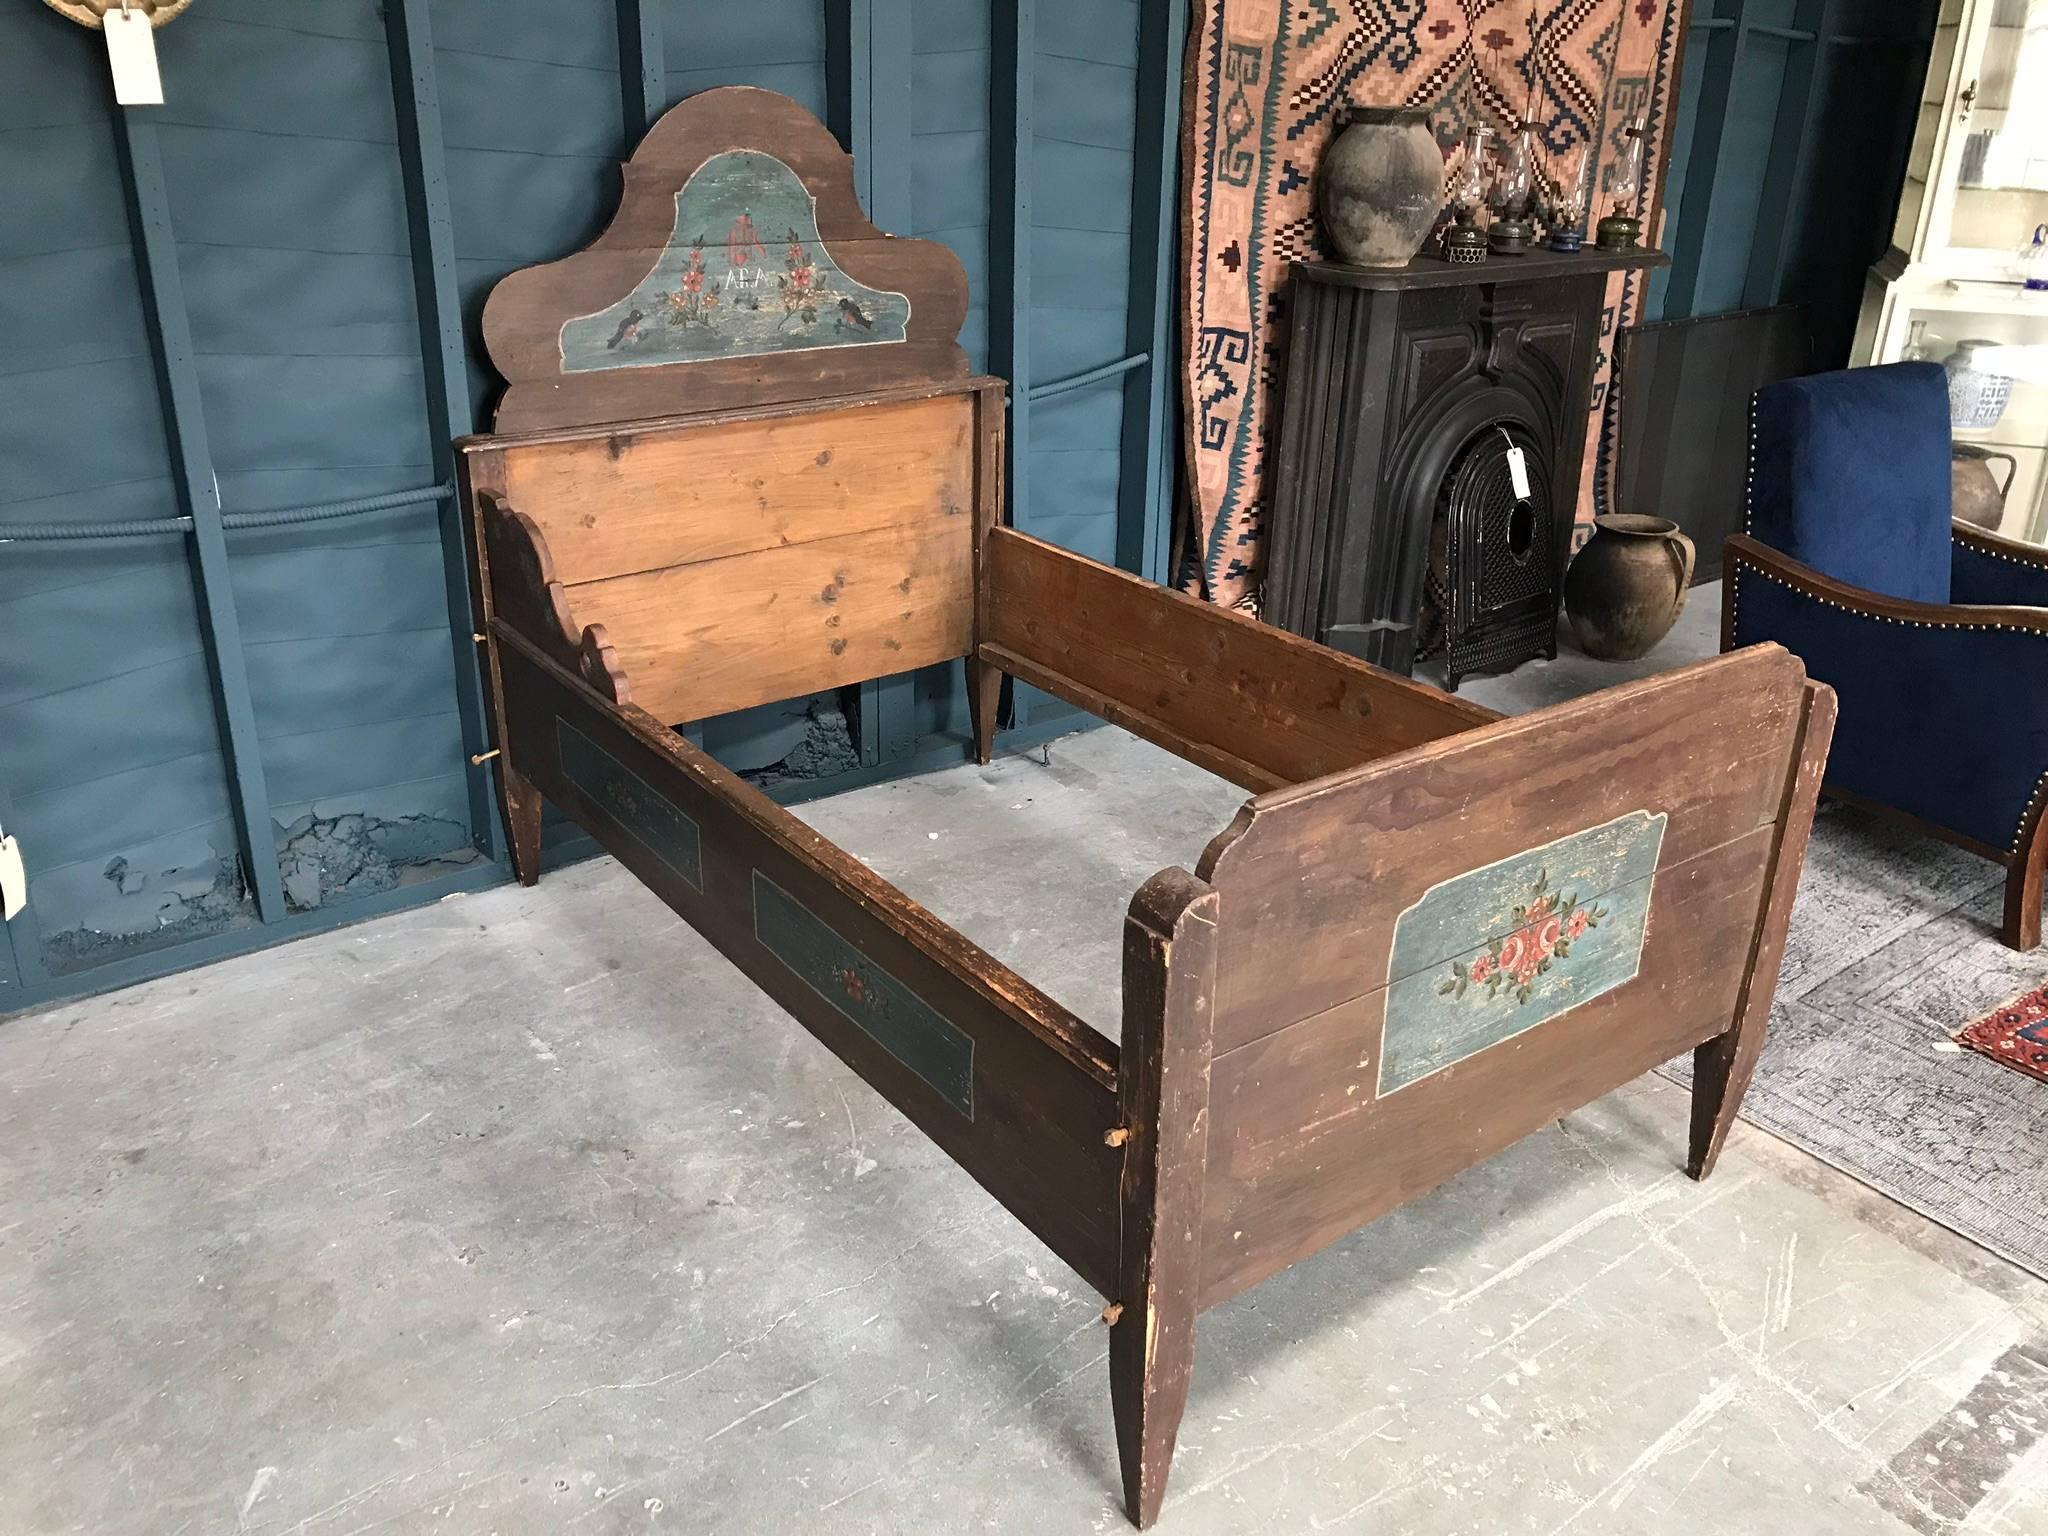 Late 19th century, children's bed frame in oak. Features tapered legs and hand-painted details of roses, birds, and the name 'Ara'.